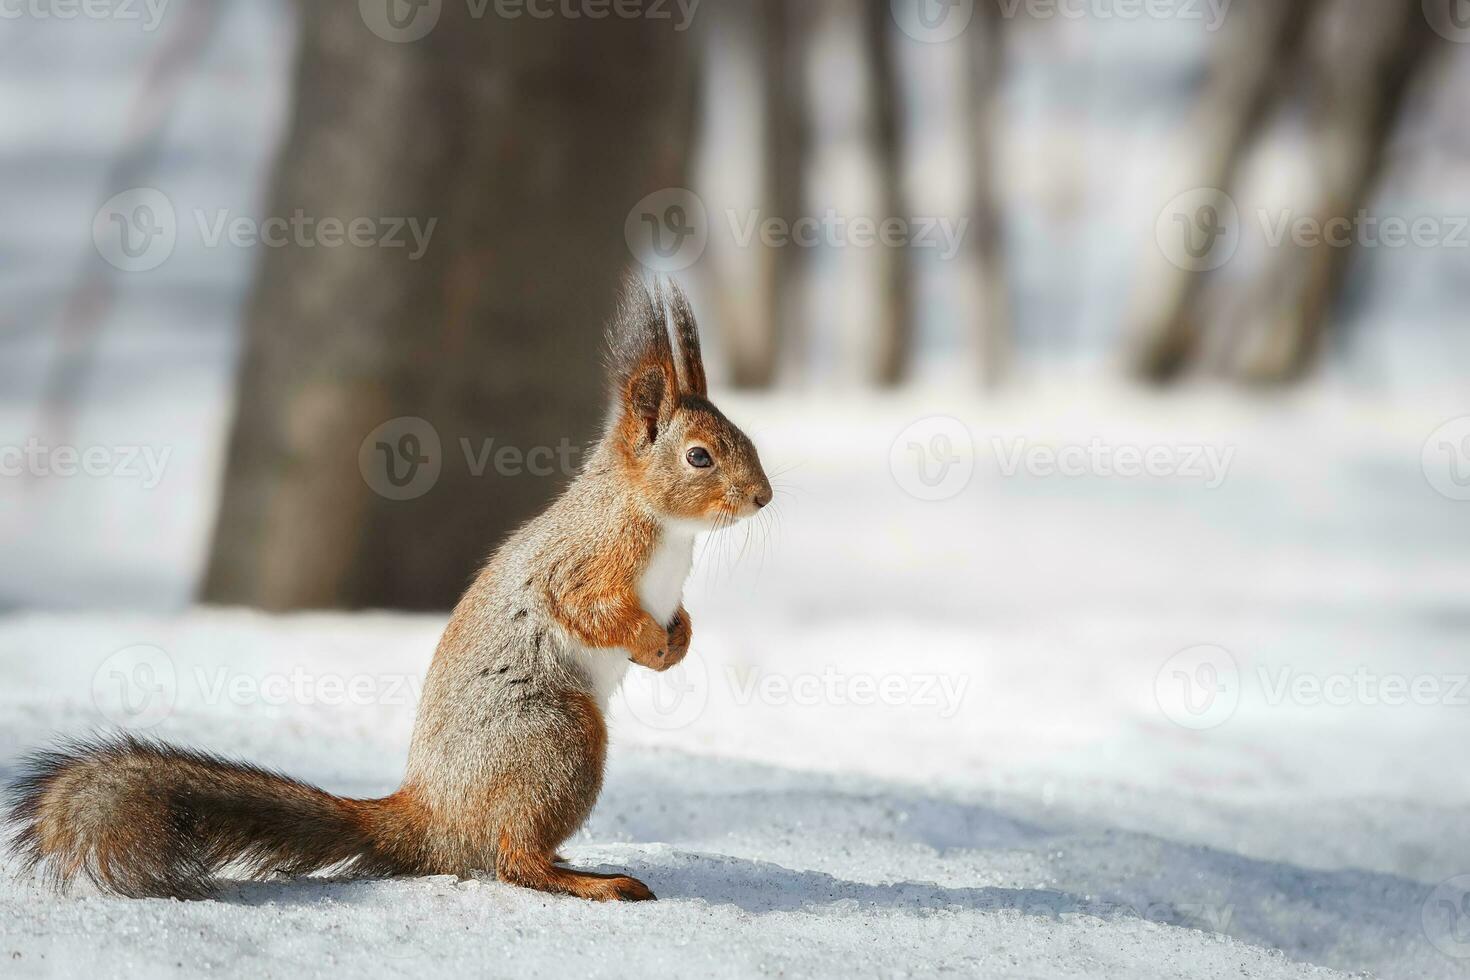 cute young squirrel on tree with held out paw against blurred winter forest in background photo